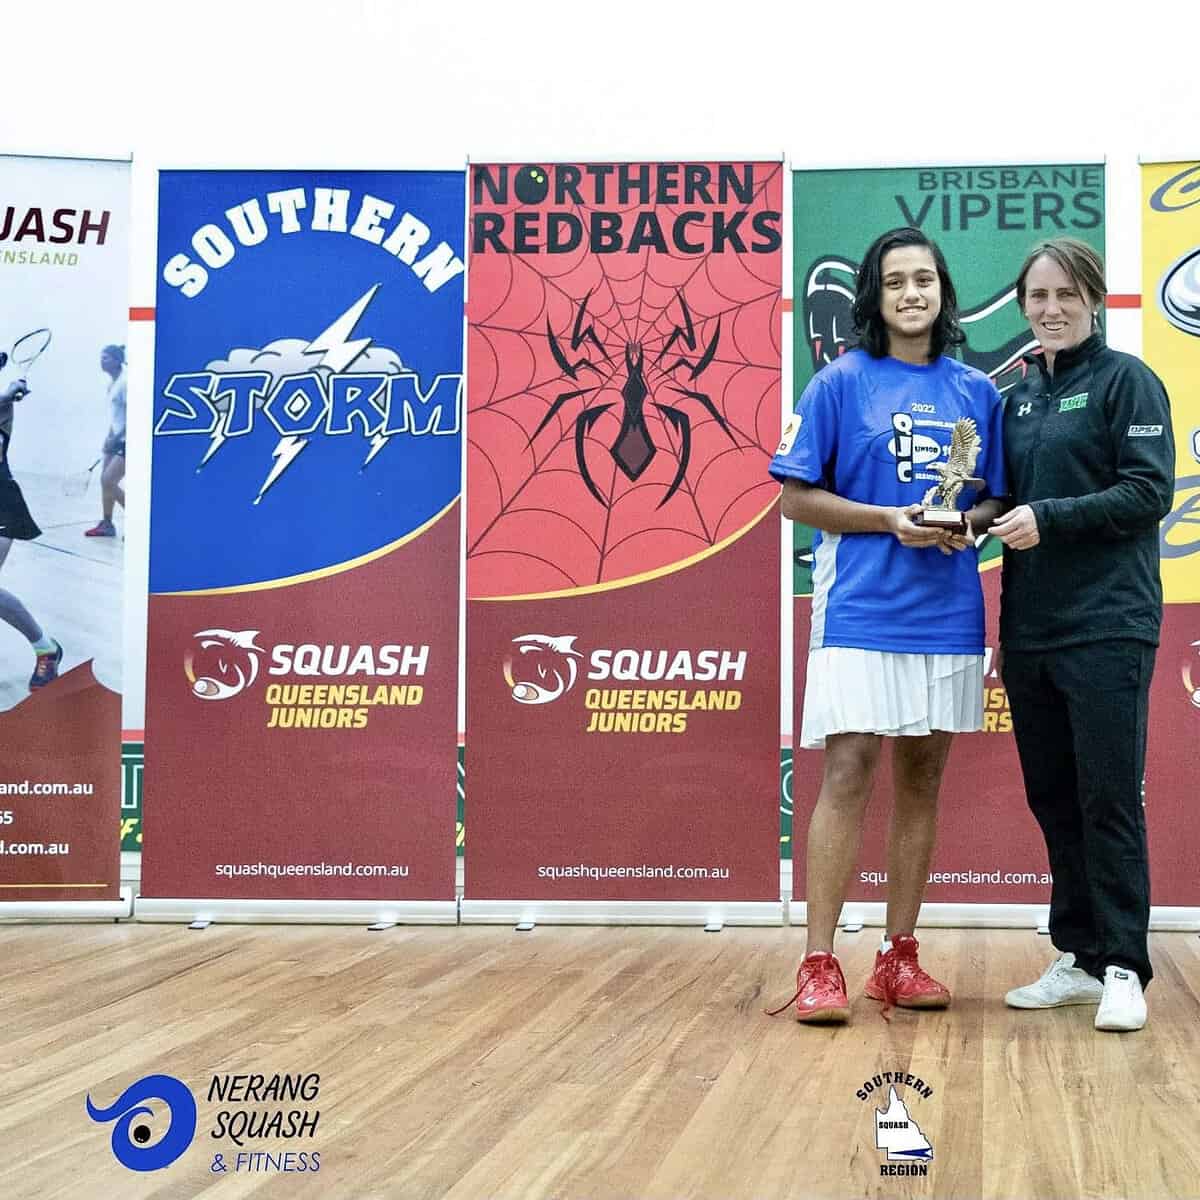 Sarbani Maitra was presented with the Rachael Grinham Eagle Award, which recognises the most promising female player, by Rachael herself at the Queensland State Titles in July this year.